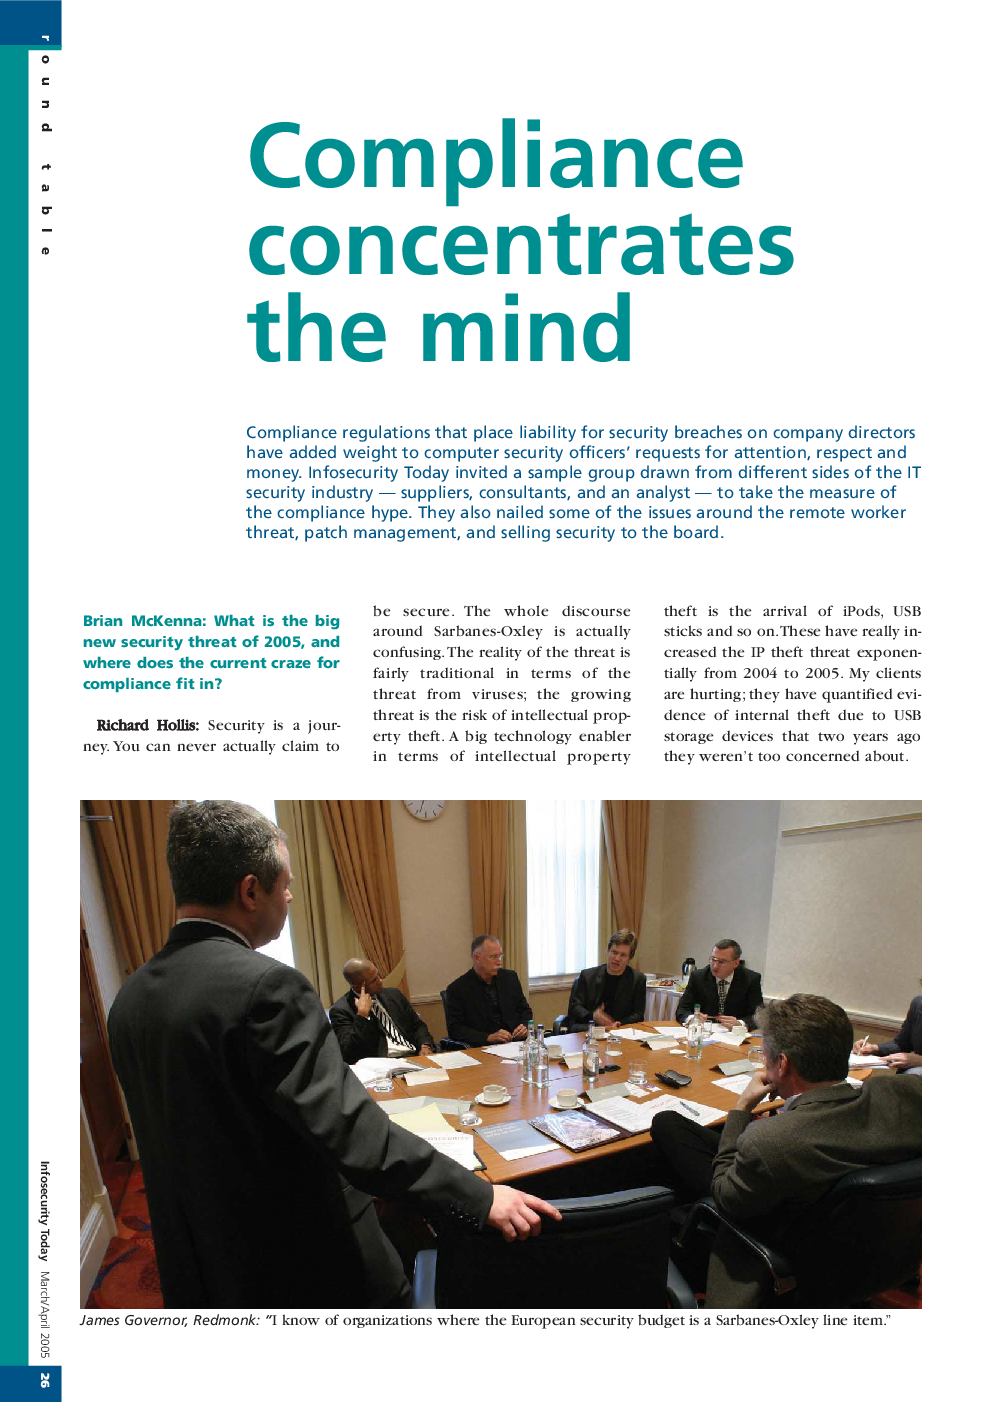 Compliance concentrates the mind